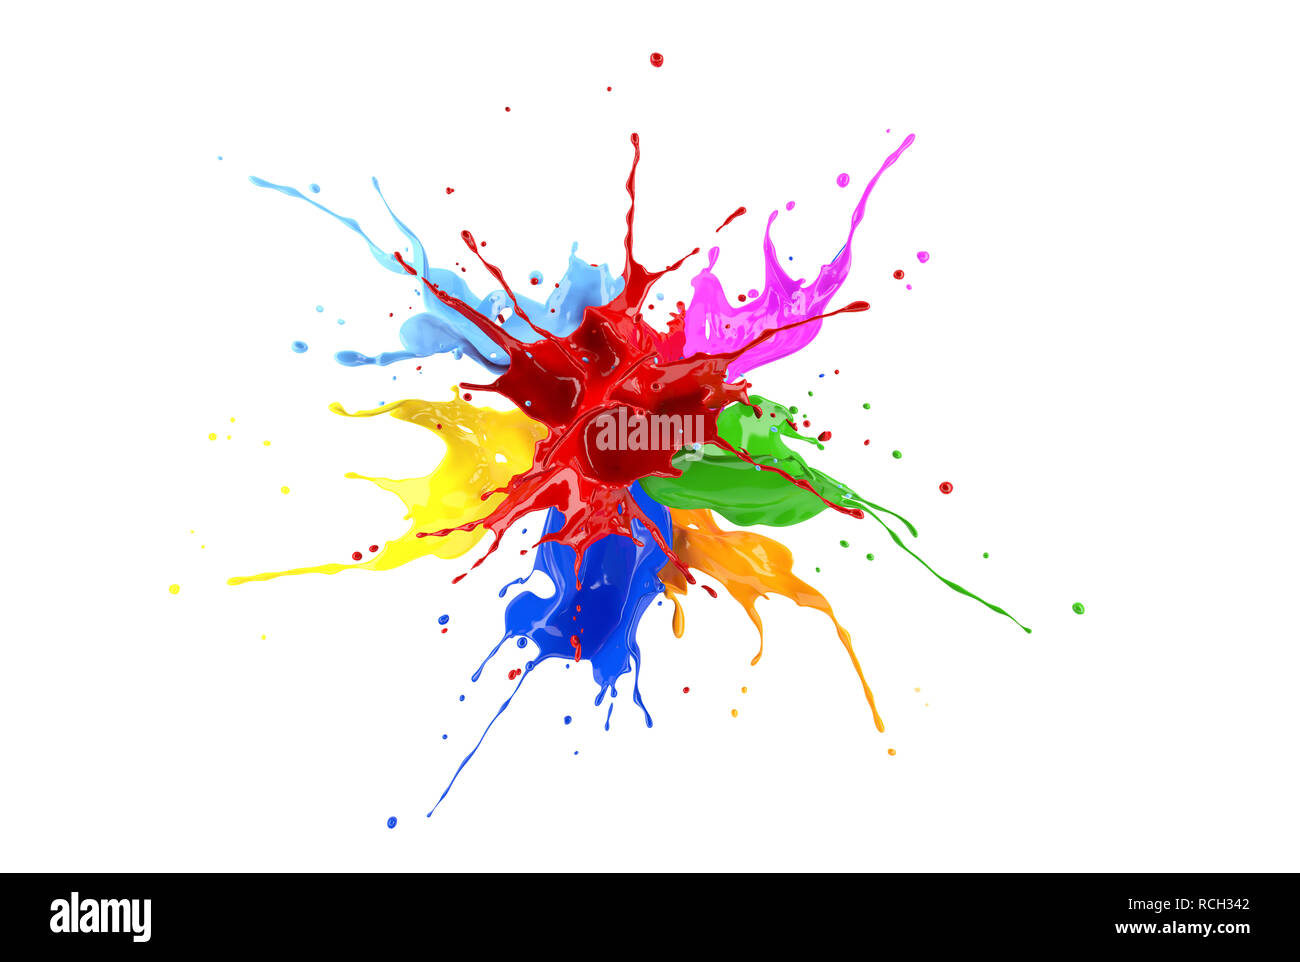 Red, blue, pink, yellow, light blue, orange and green paint splash explosion. Isolated on white background. Stock Photo